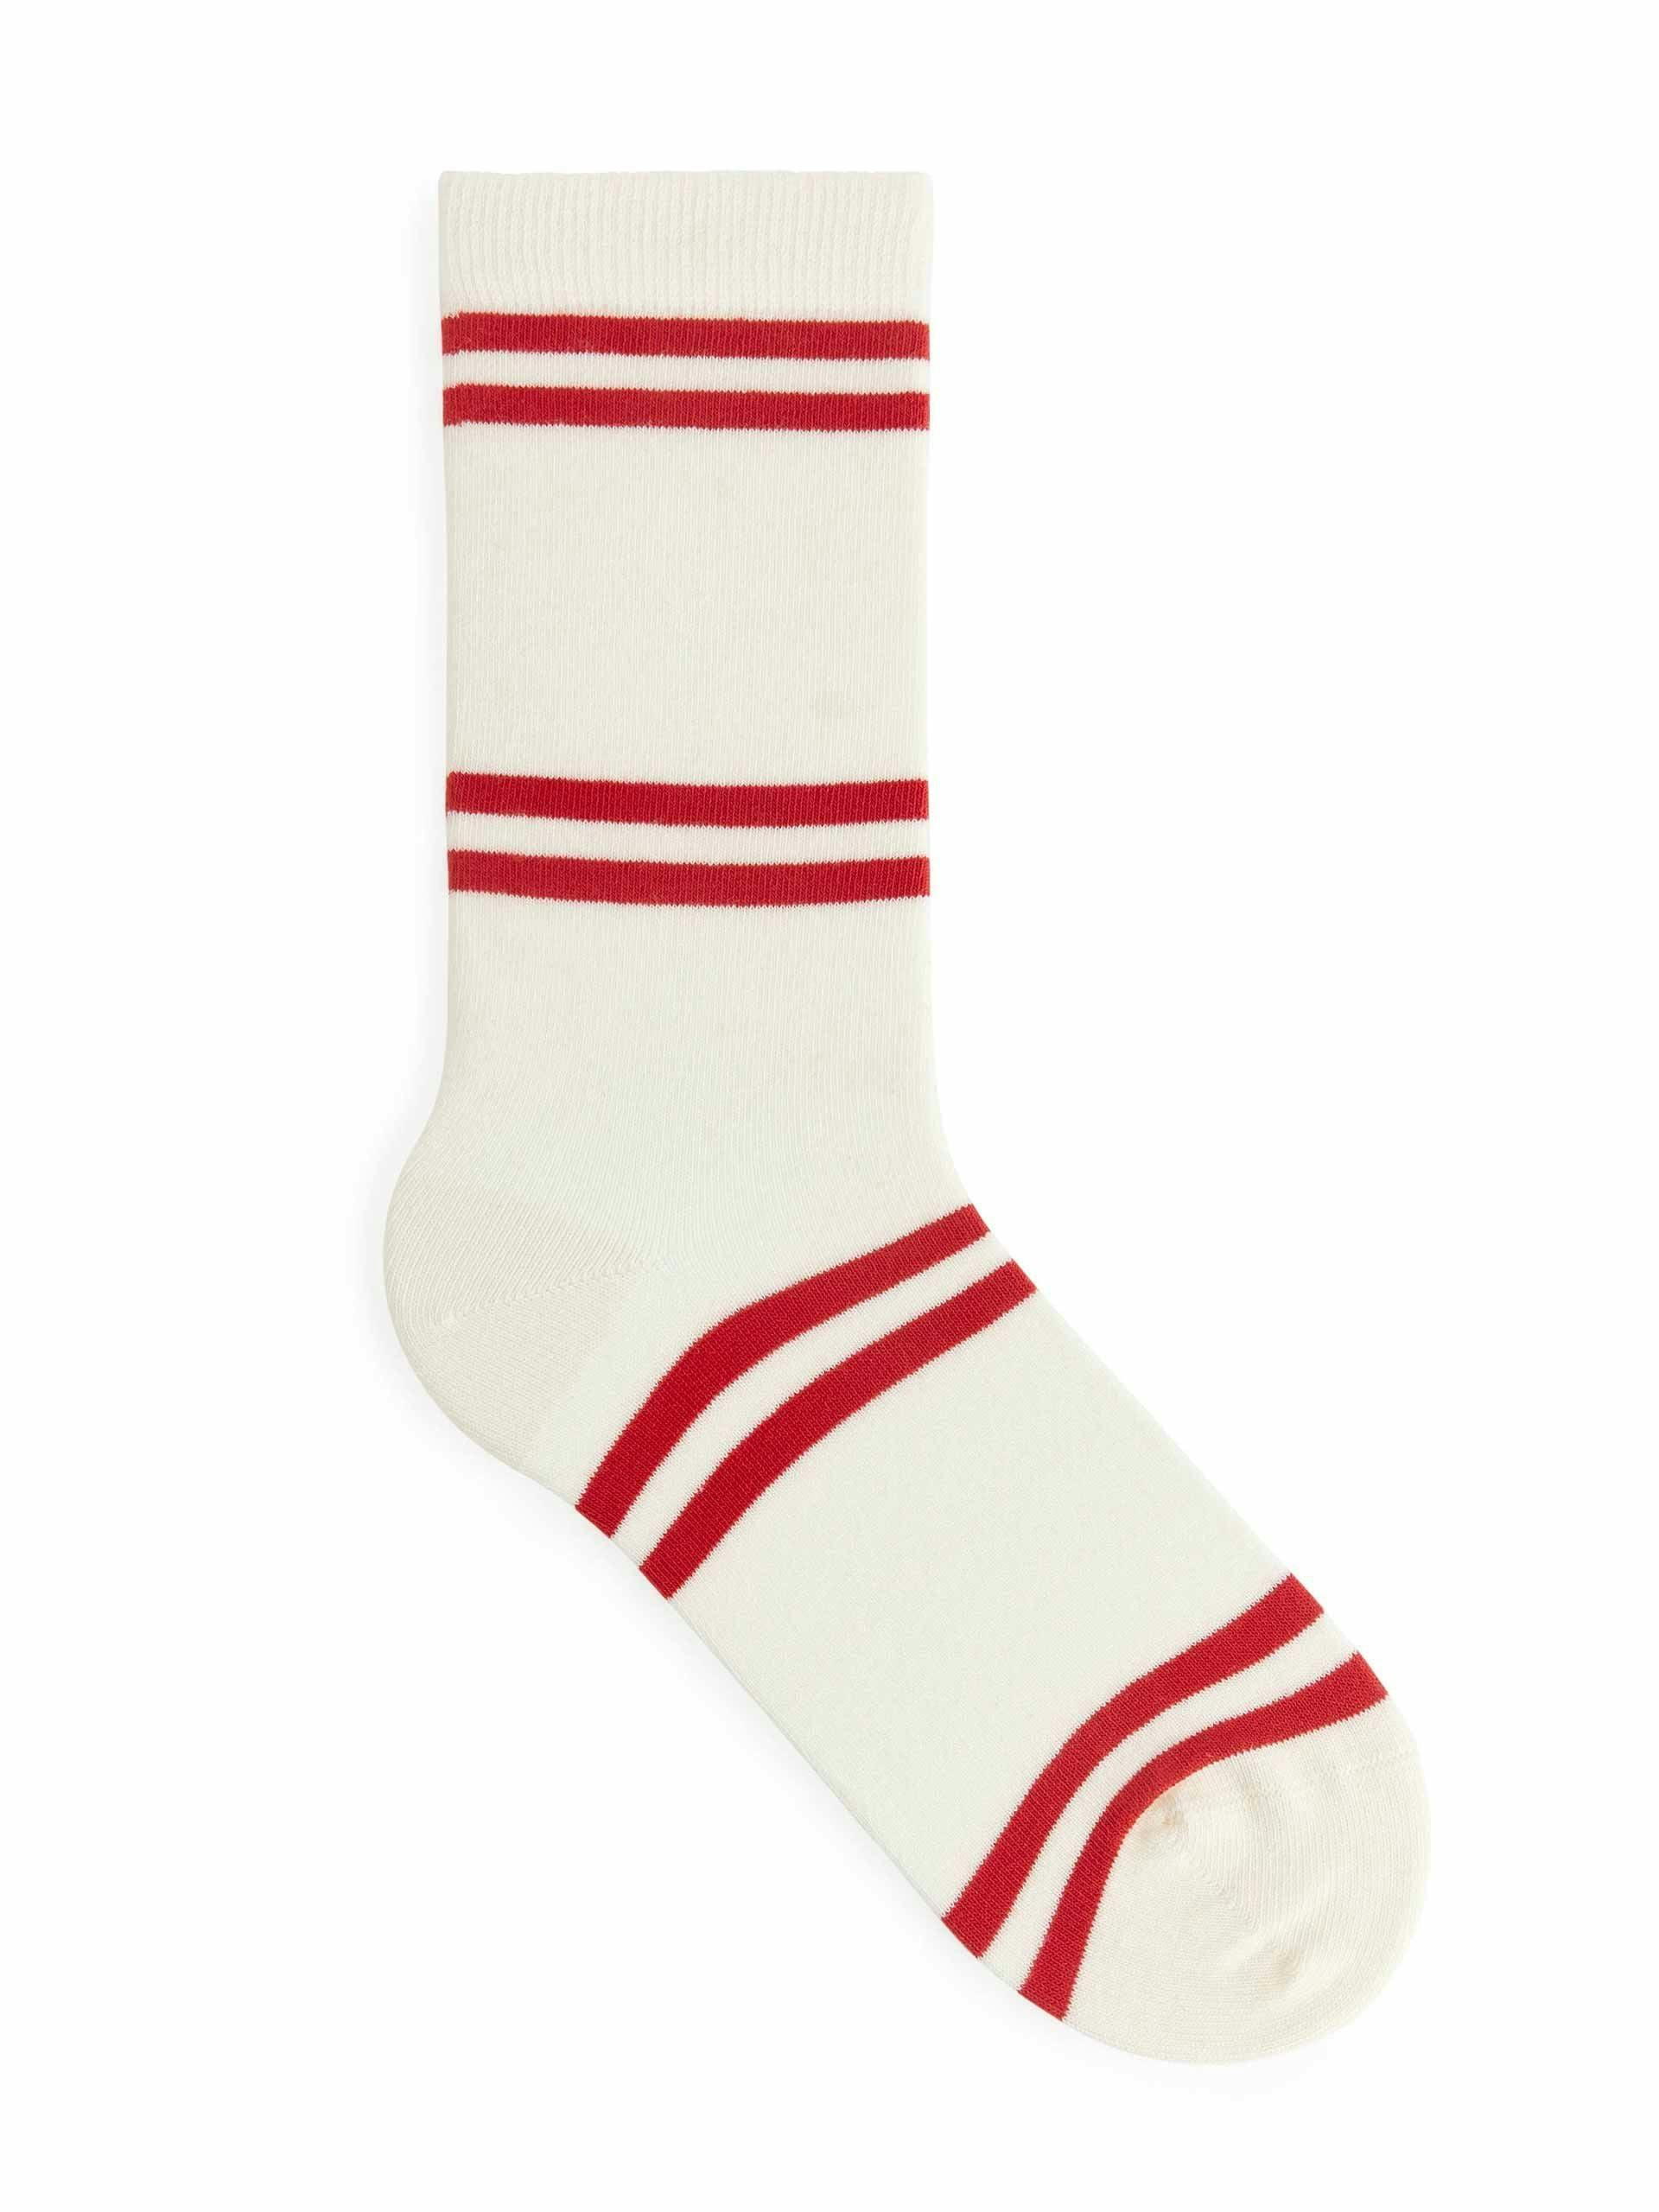 Red and cream striped cotton socks